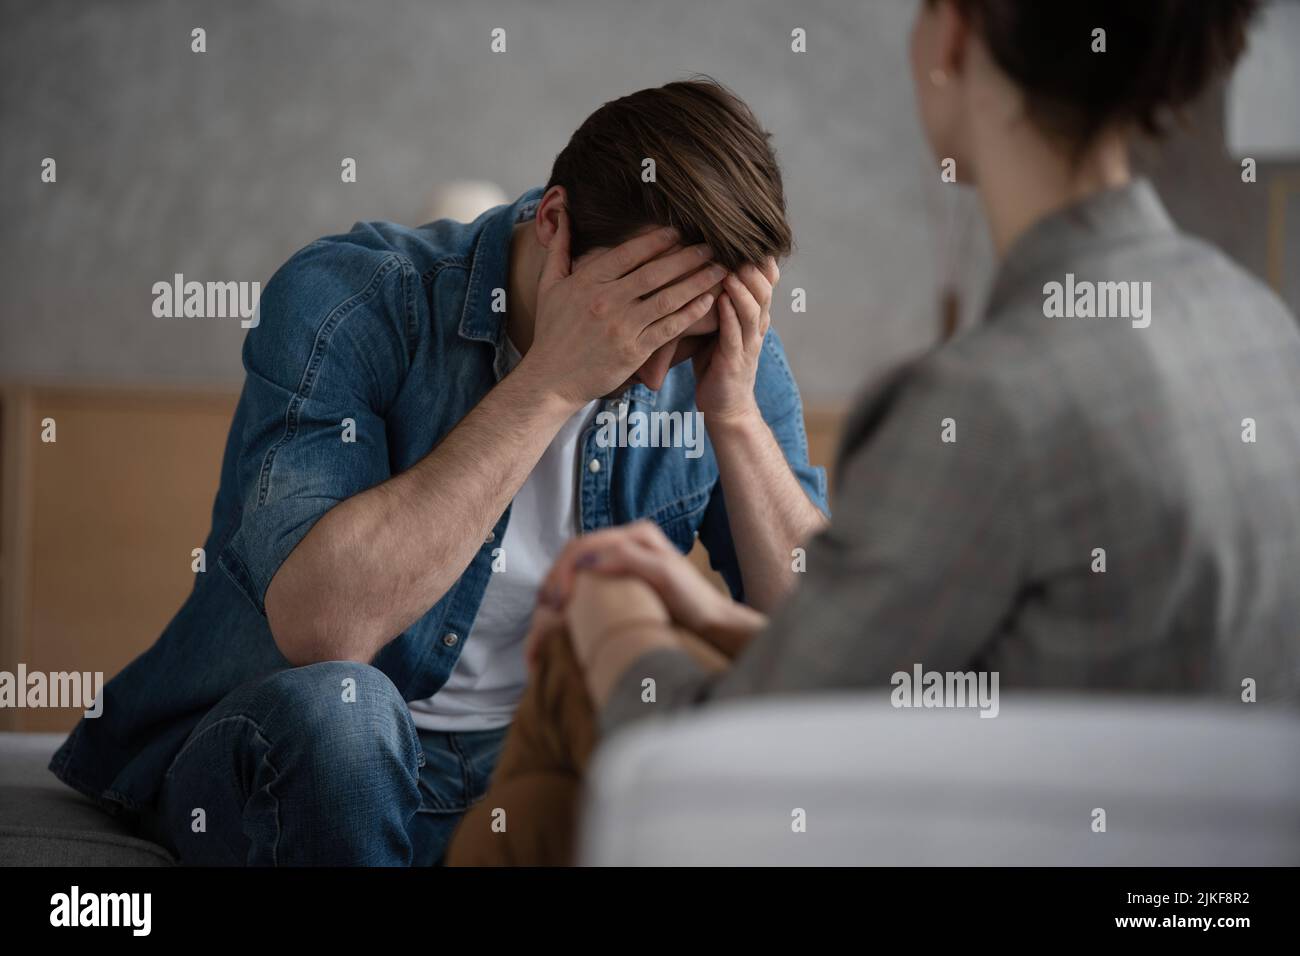 Psychologist talking with patient on therapy session. Depressed man speaking to a therapist while she is taking notes Stock Photo